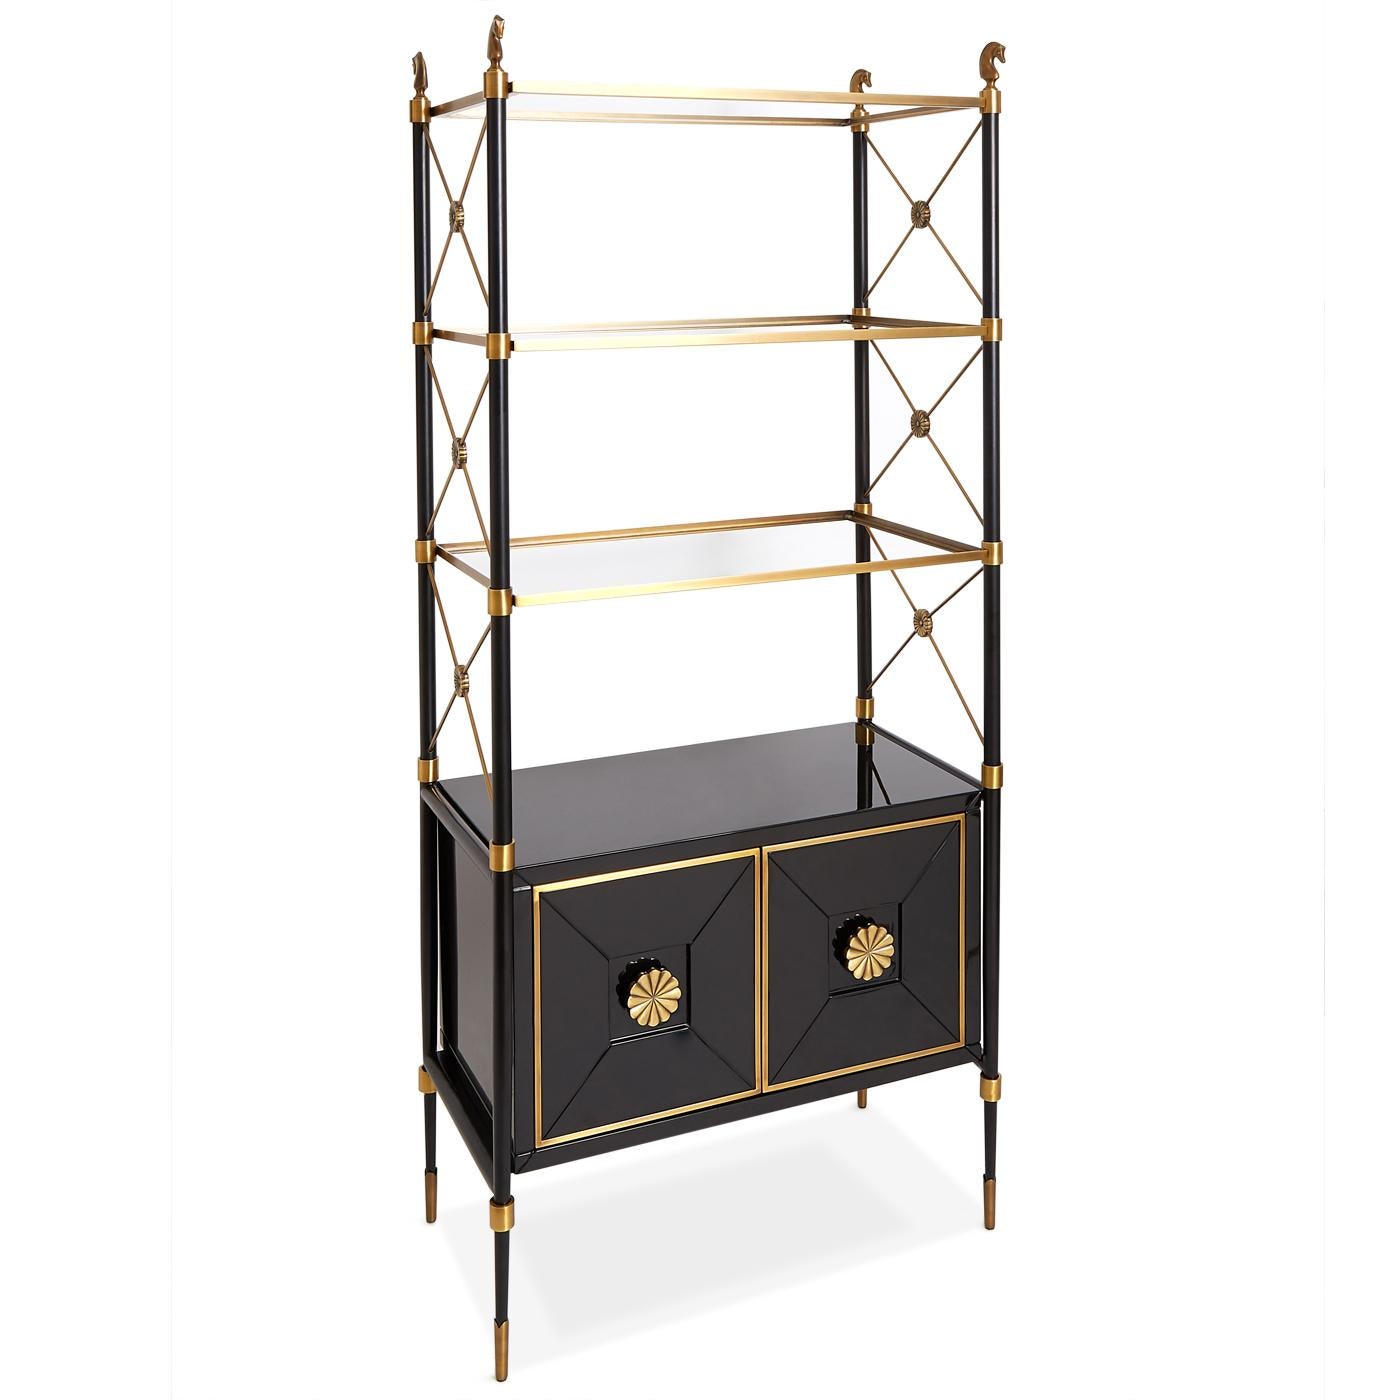 Parisian flair. Our rider étagère is an updated take on French Empire style. Glossy black lacquer with antiqued brass accents and cast brass horse finials create a regal vibe. The floating glass shelves and leggy base make this hardworking étagère